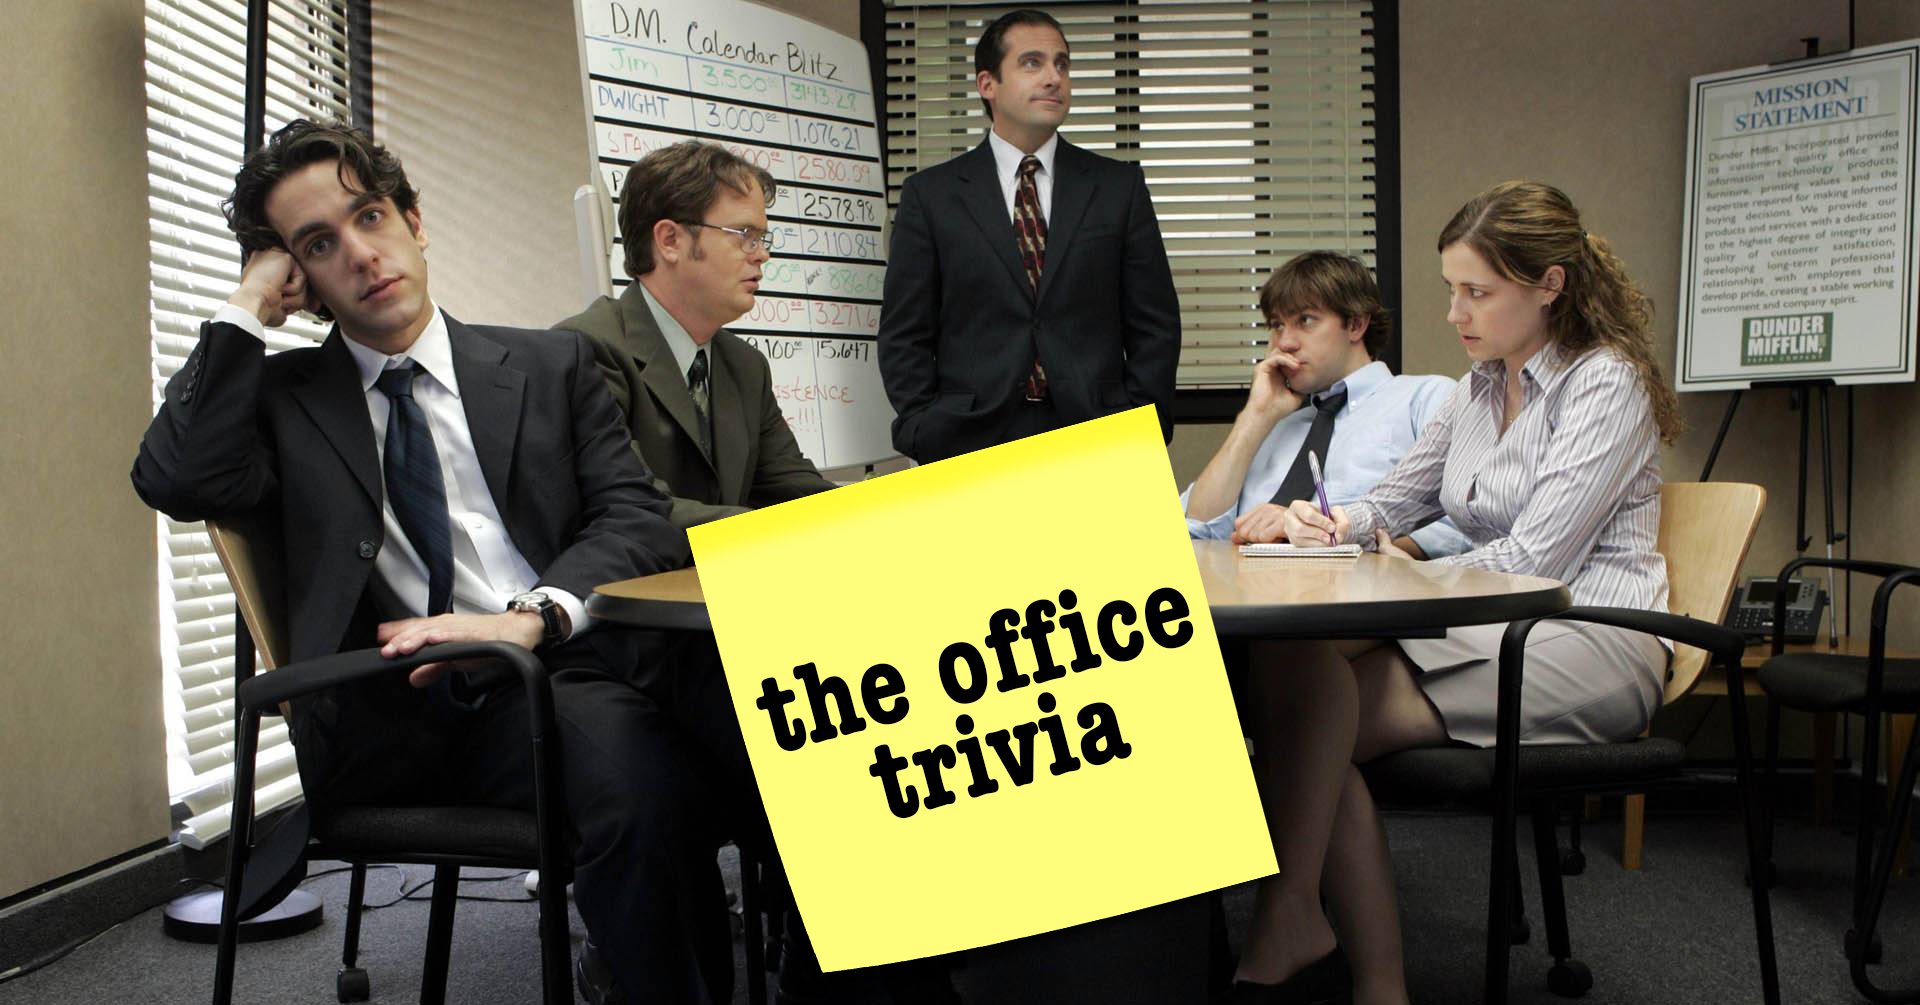 Scene from the office with "the office trivia" post it note